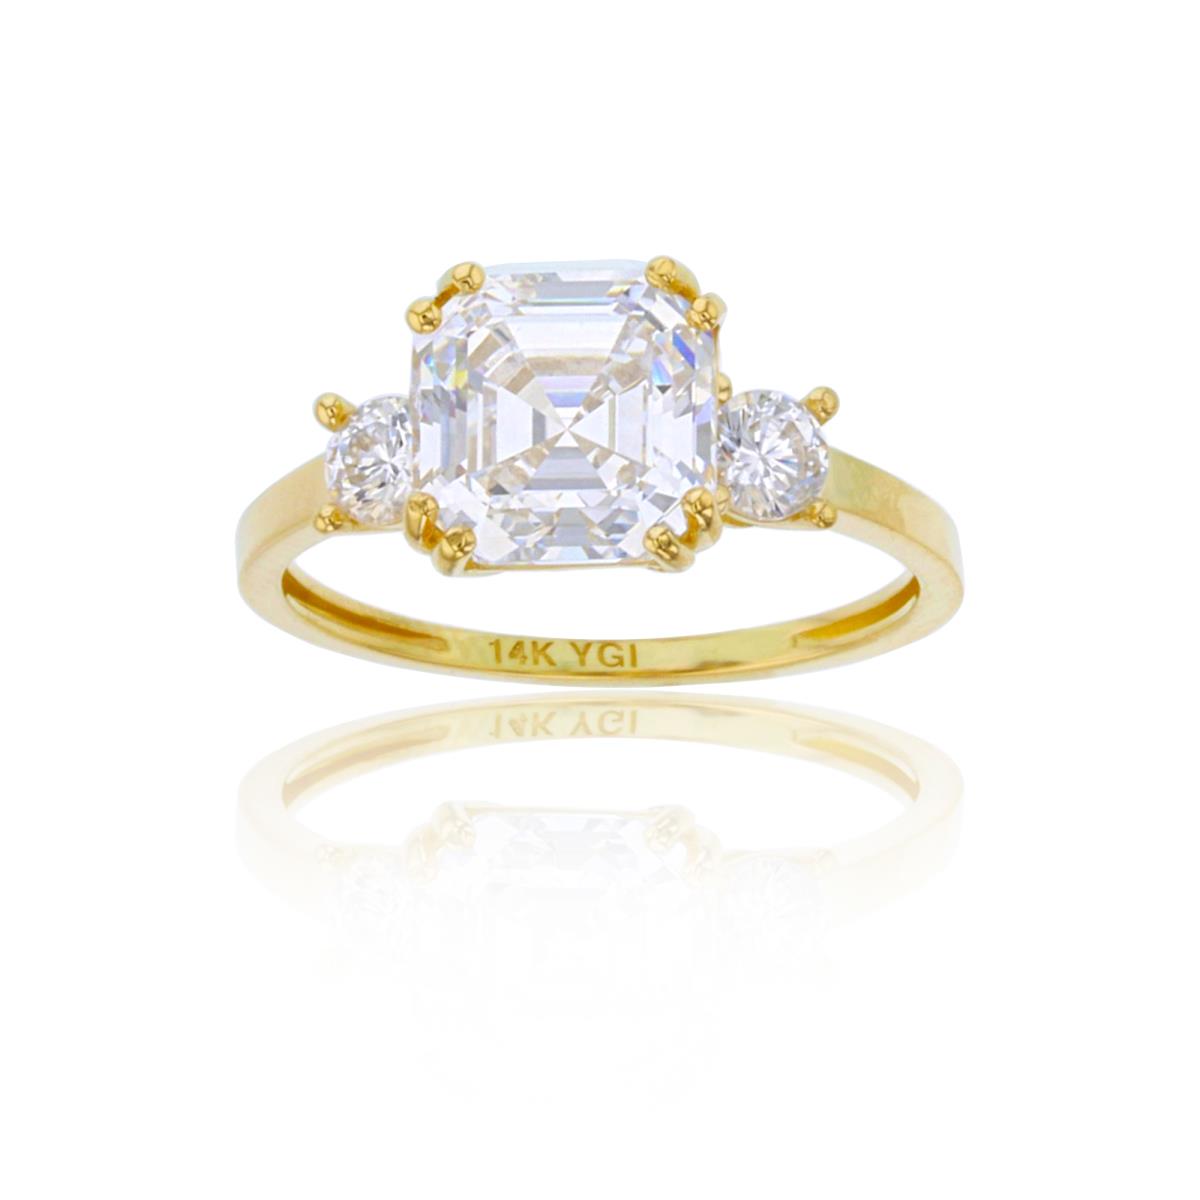 10K Yellow Gold 8mm Cush & 3.5mm Rnd White CZ Solitaire Ring